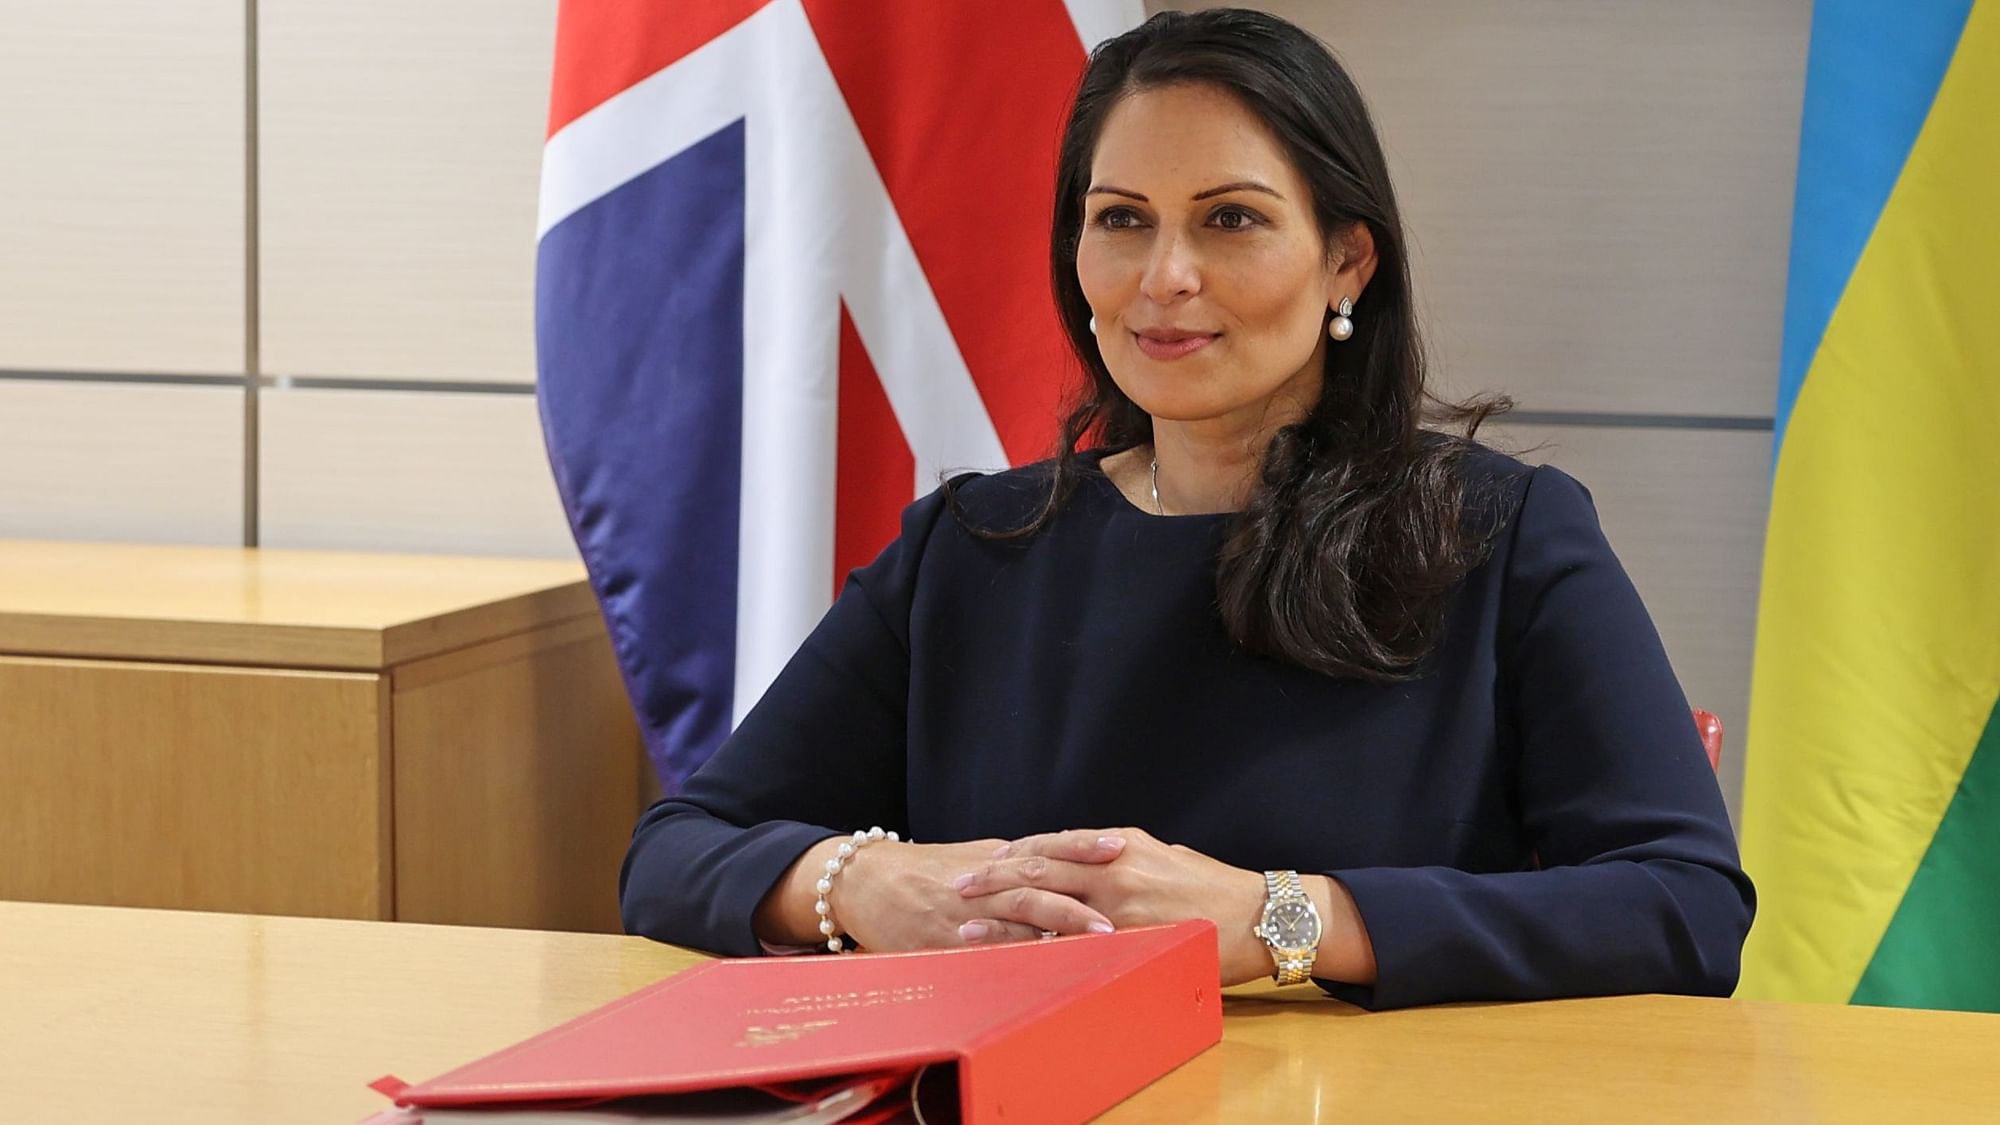 <div class="paragraphs"><p>British Home Secretary Priti Patel announced her resignation on Monday, 5 September, hours after Conservative Party leader Liz Truss was elected as the Prime Minister of the United Kingdom.</p></div>